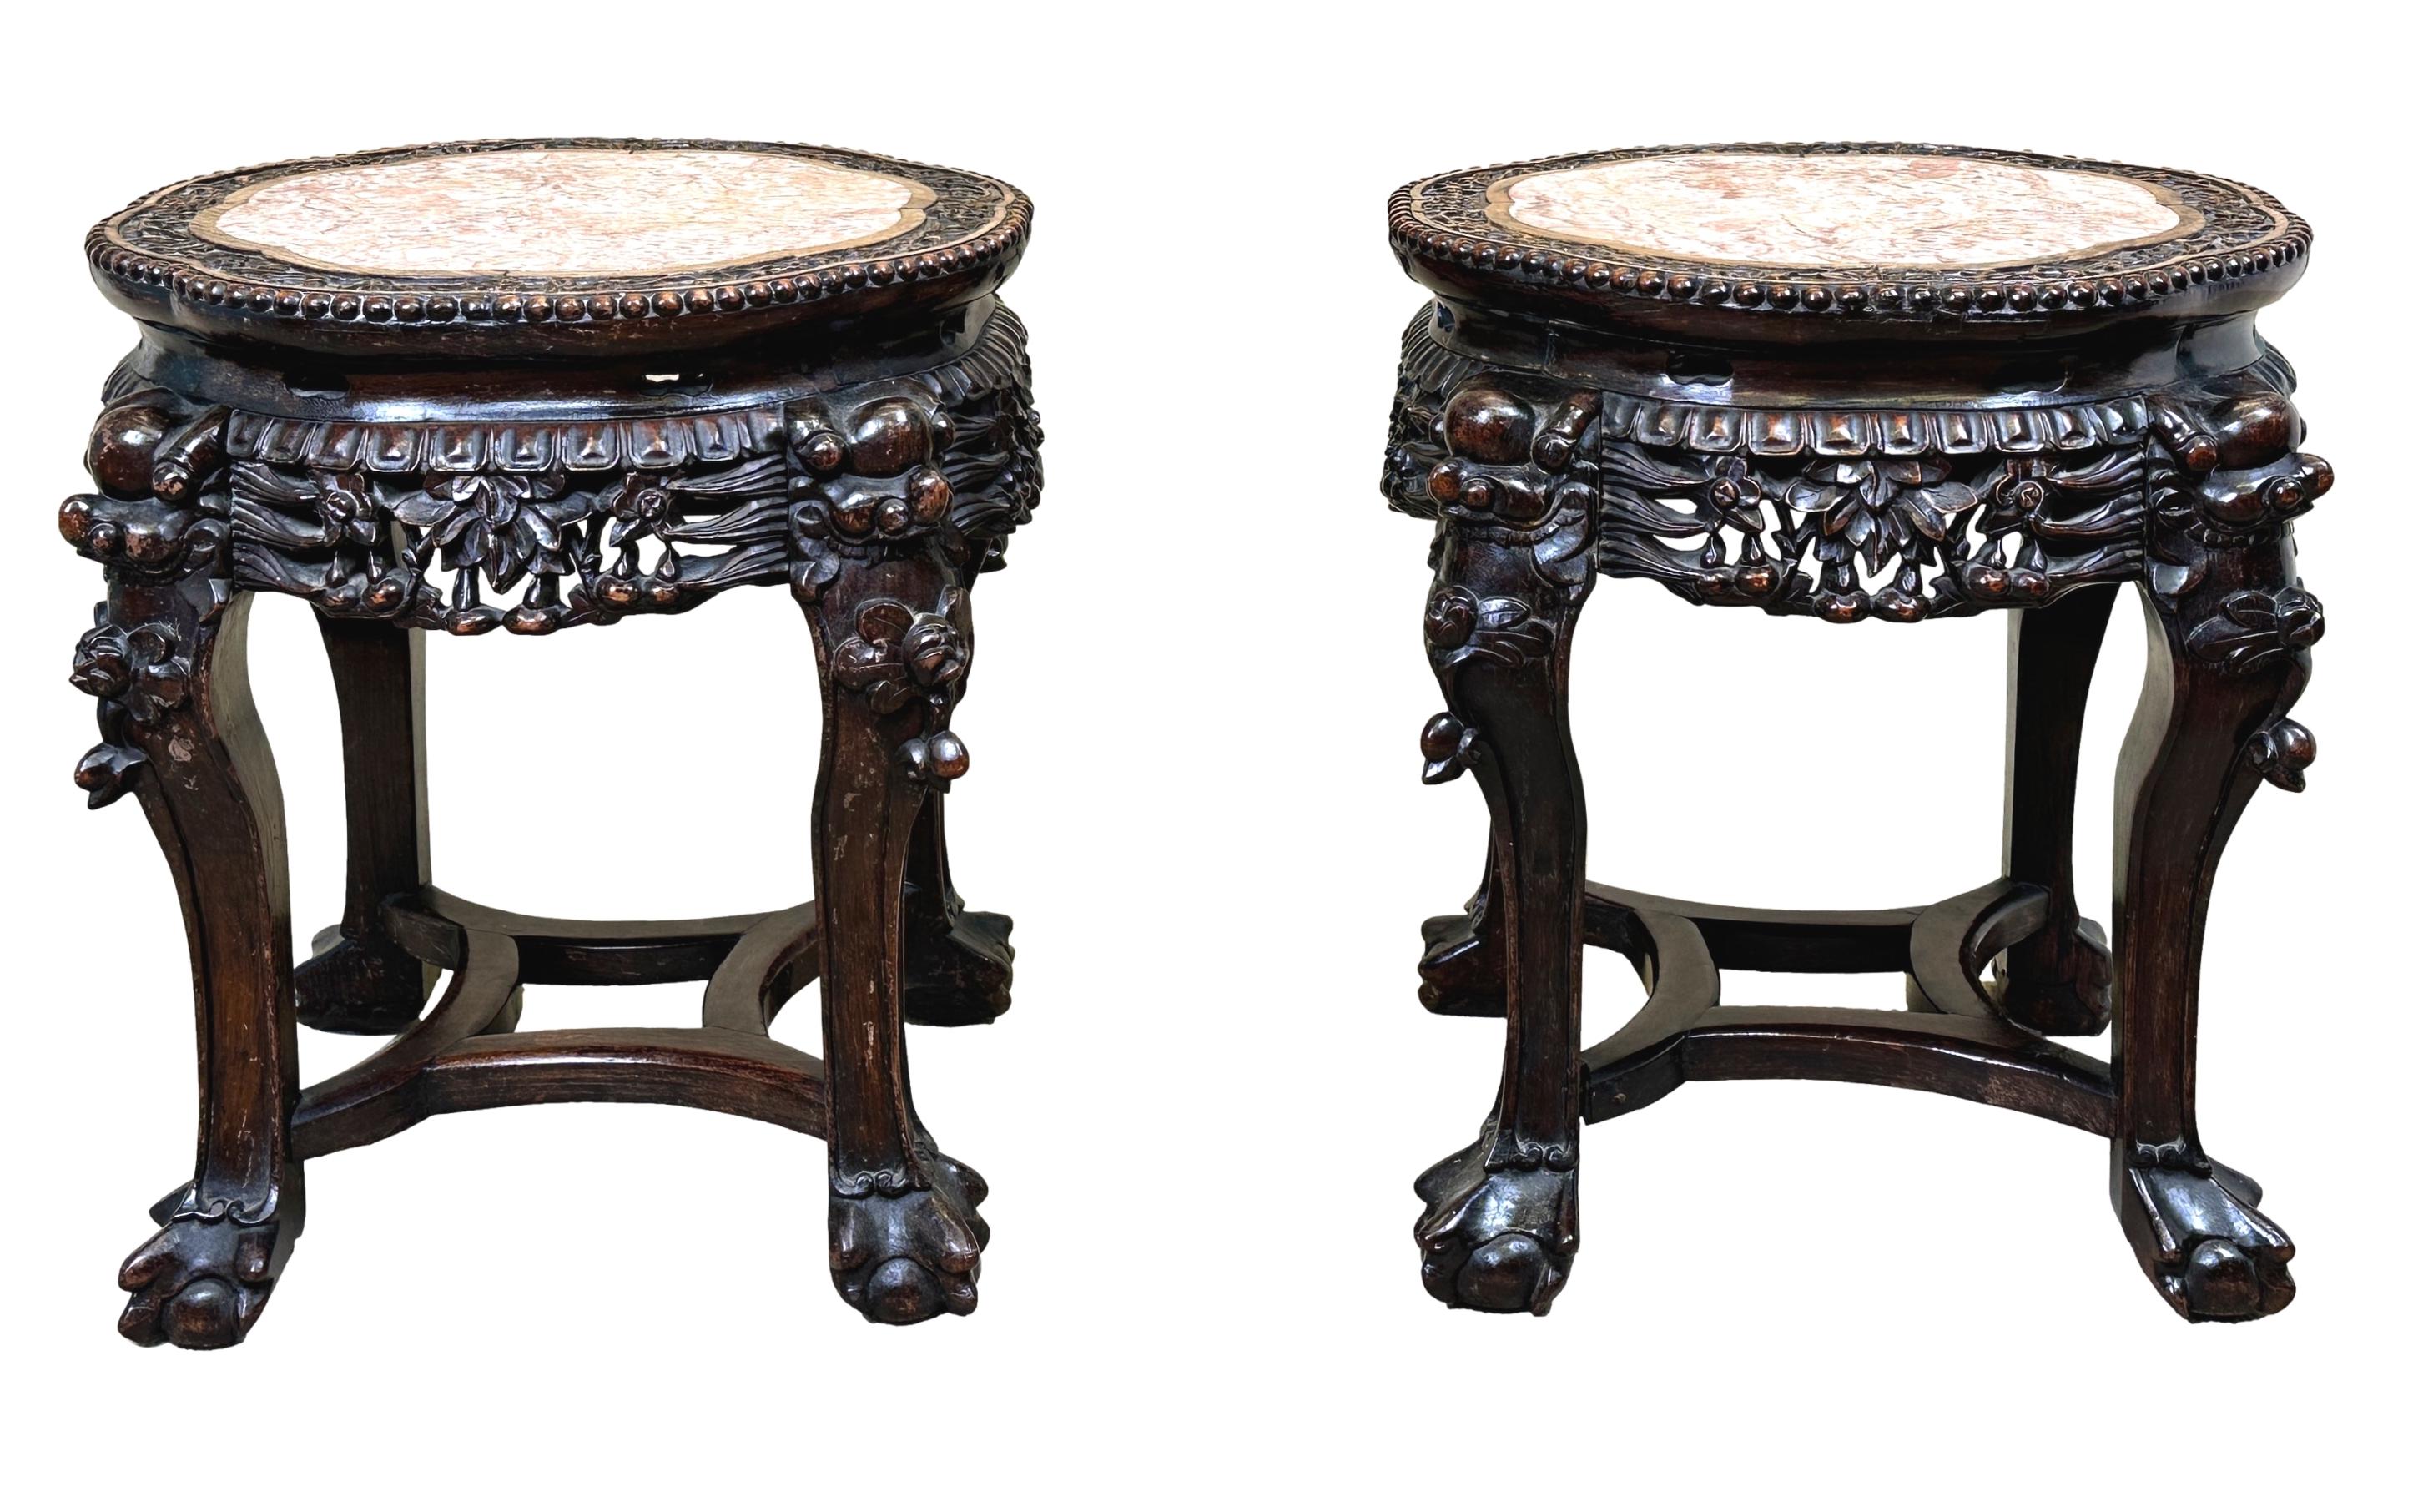 Pair of 19th Century Oriental Hardwood Coffee Tables In Good Condition For Sale In Bedfordshire, GB